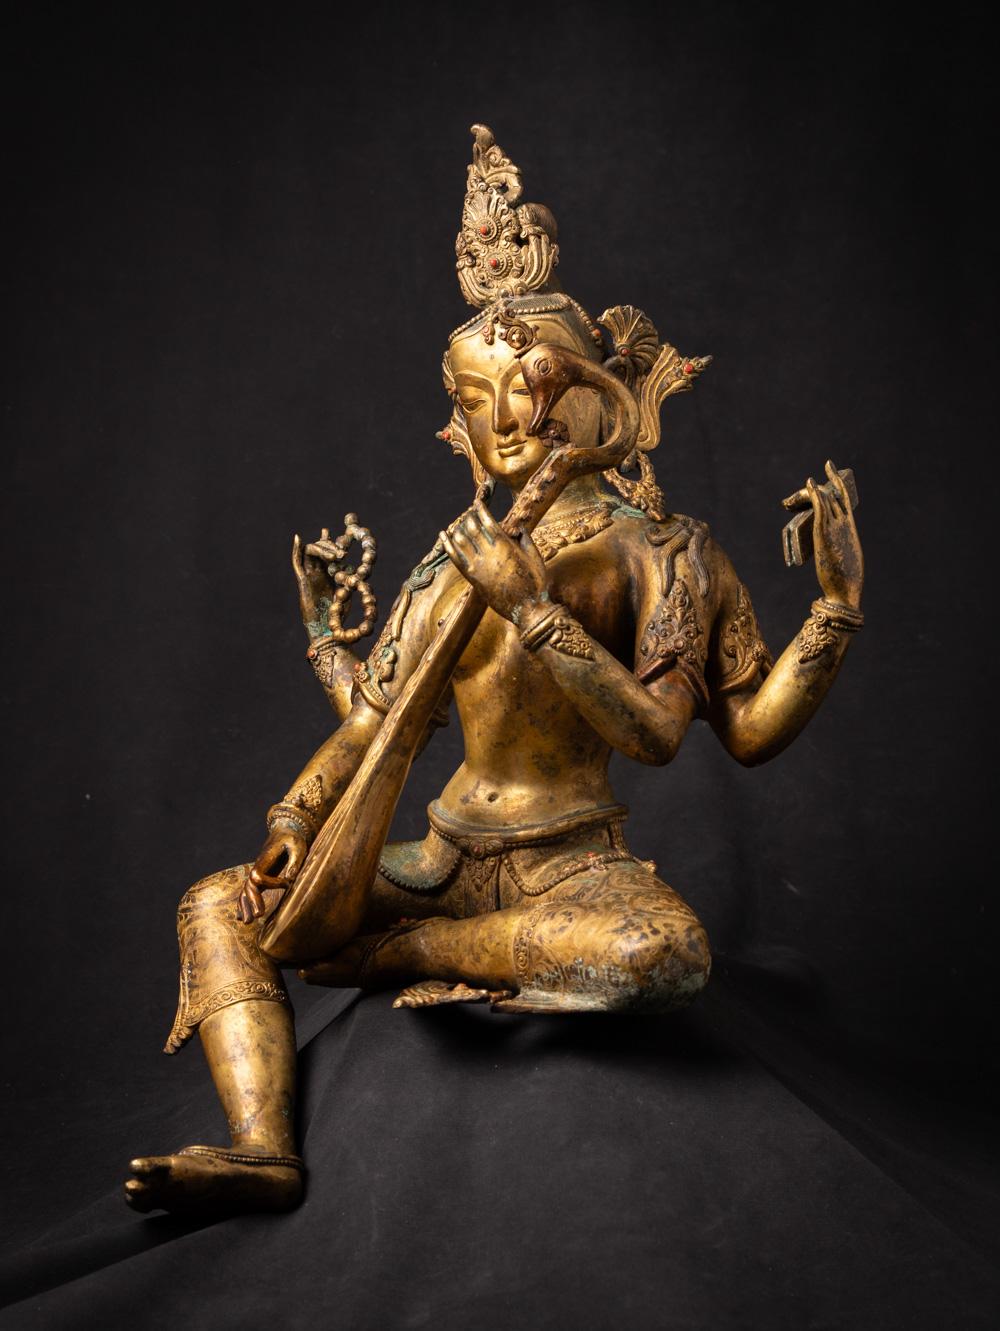 The large old bronze Nepali Saraswati statue is a truly magnificent and spiritually significant artifact originating from Nepal. Crafted from bronze and fire gilded with 24-karat gold, this statue stands tall at 54 cm in height and measures 35.5 cm